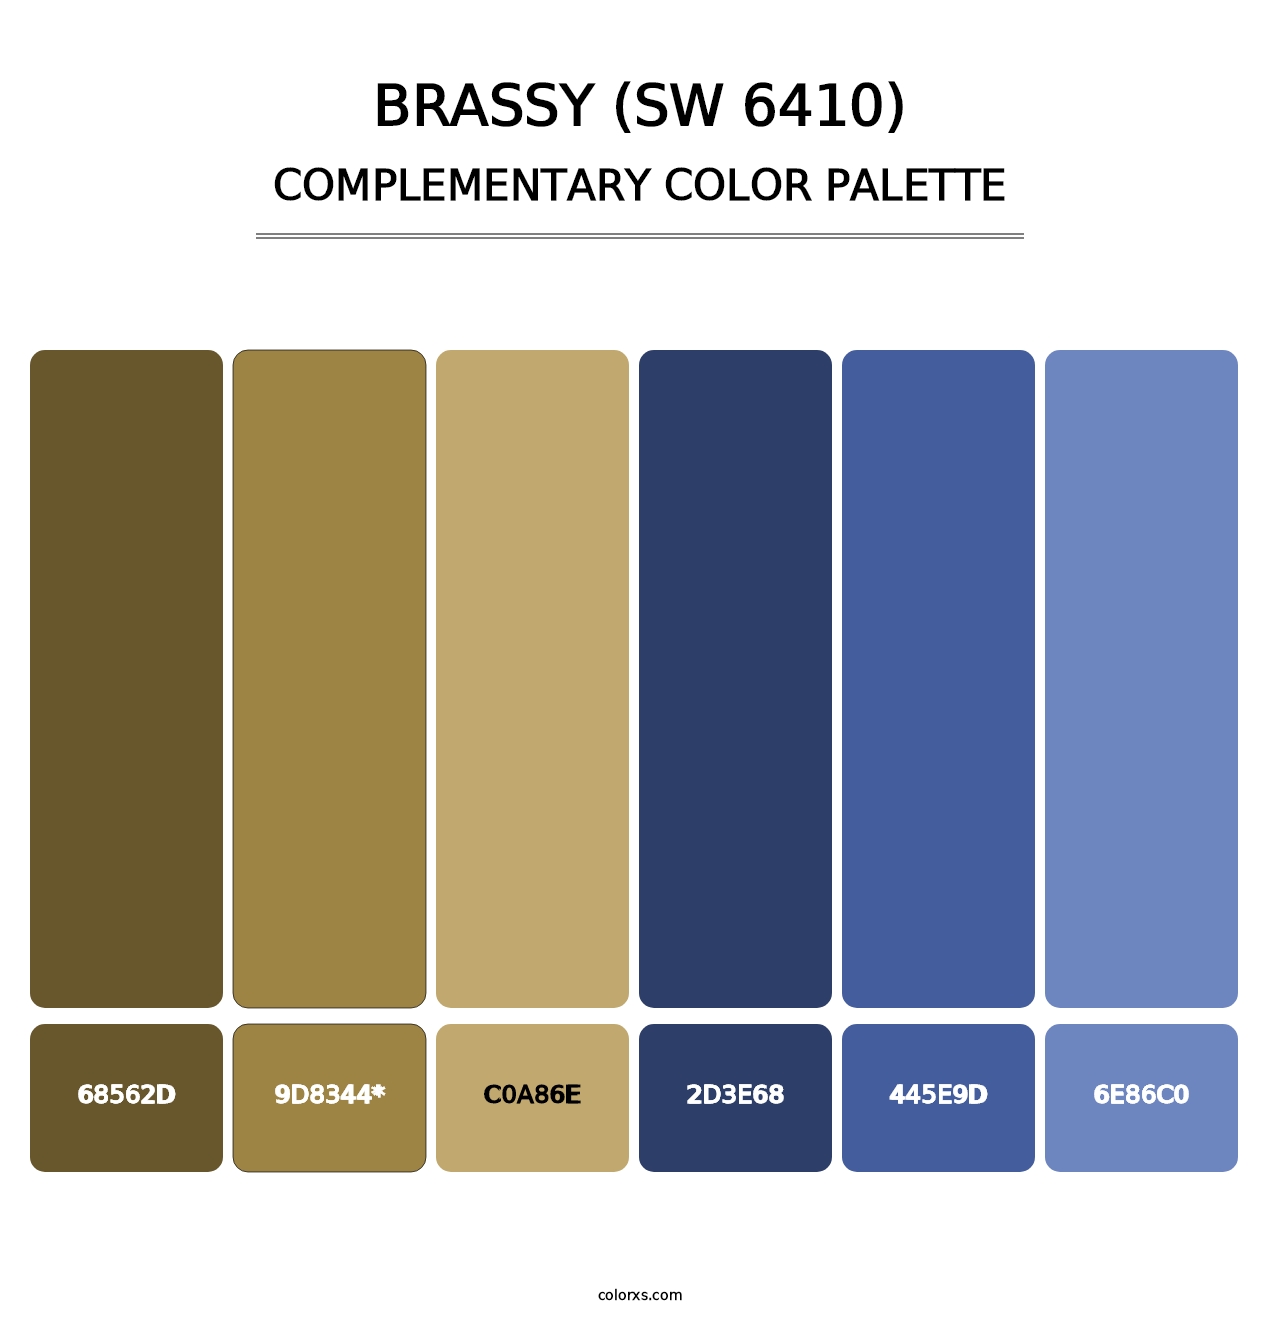 Brassy (SW 6410) - Complementary Color Palette